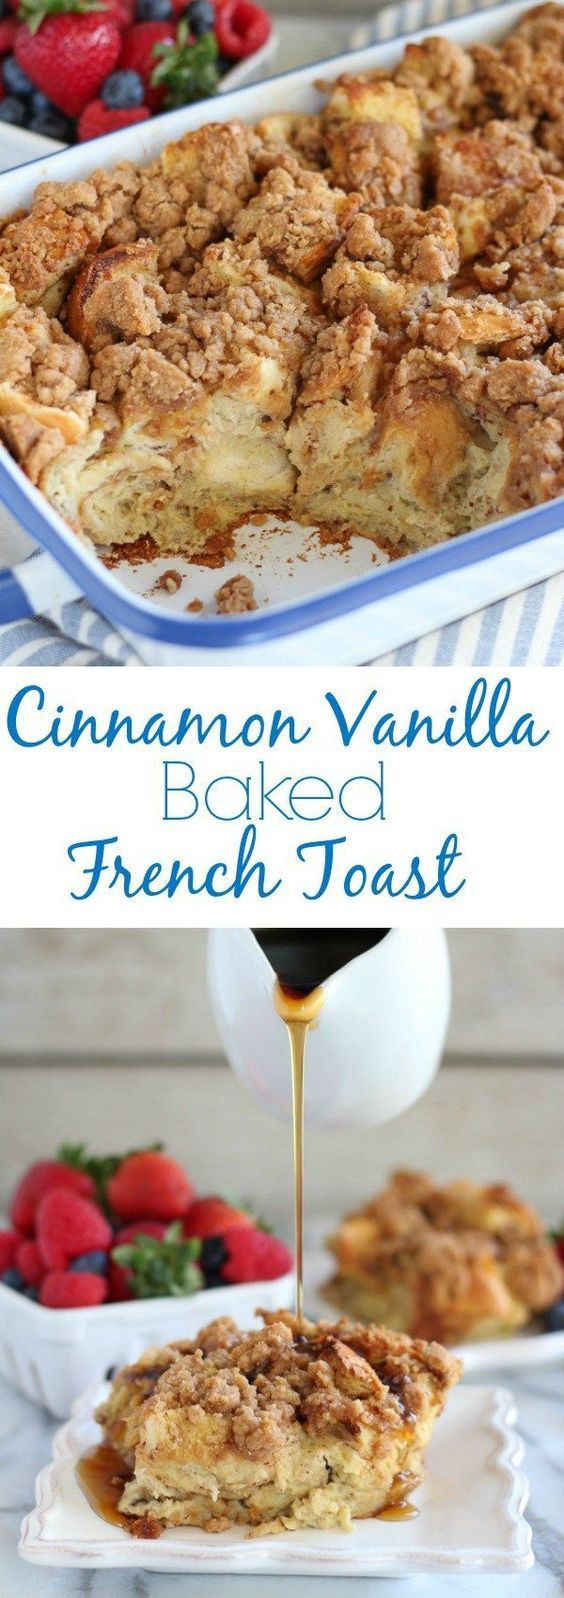 Healthy French Toast Casserole
 Best 25 Baked french toast casserole ideas on Pinterest